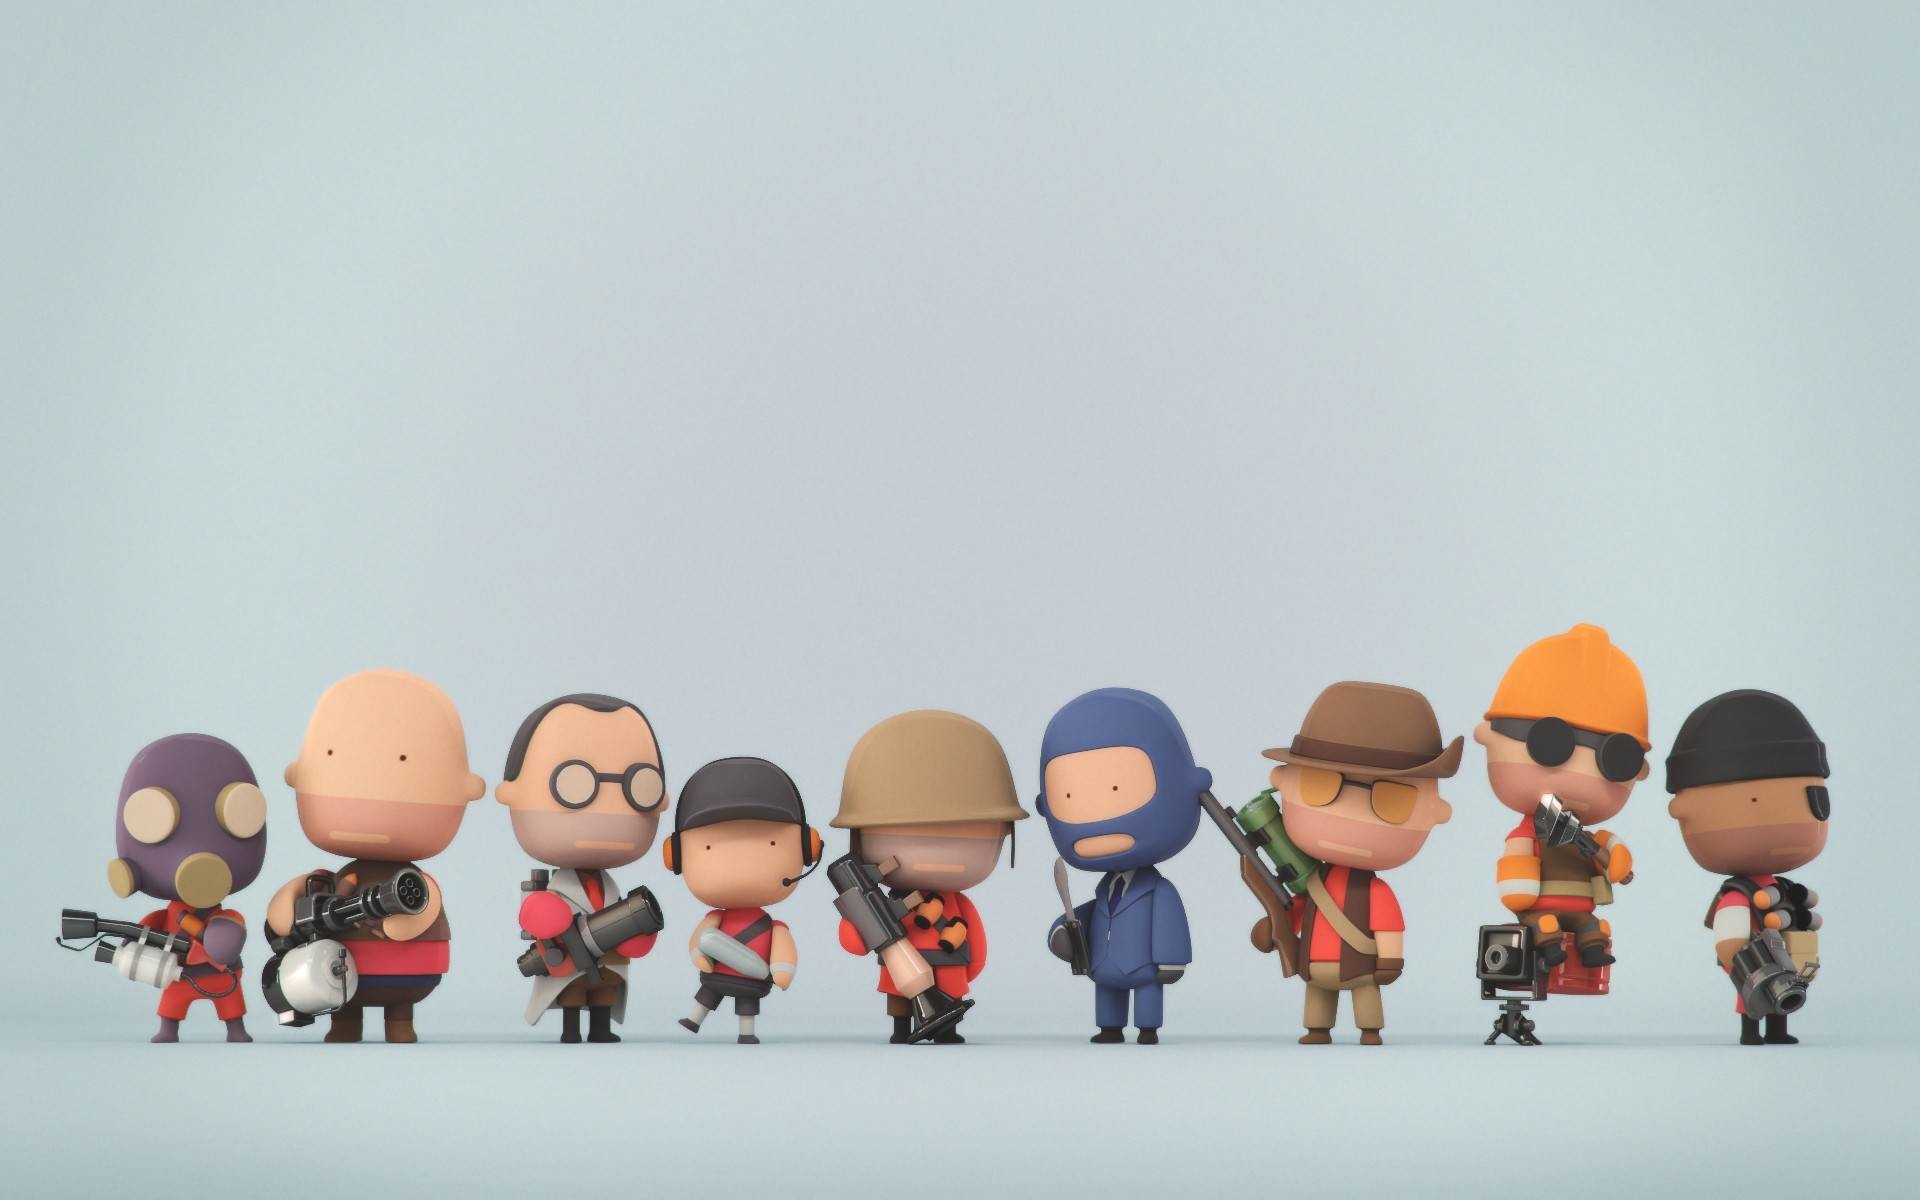 1920x1200 Tf2 Engineer Wallpaper - Viewing Gallery